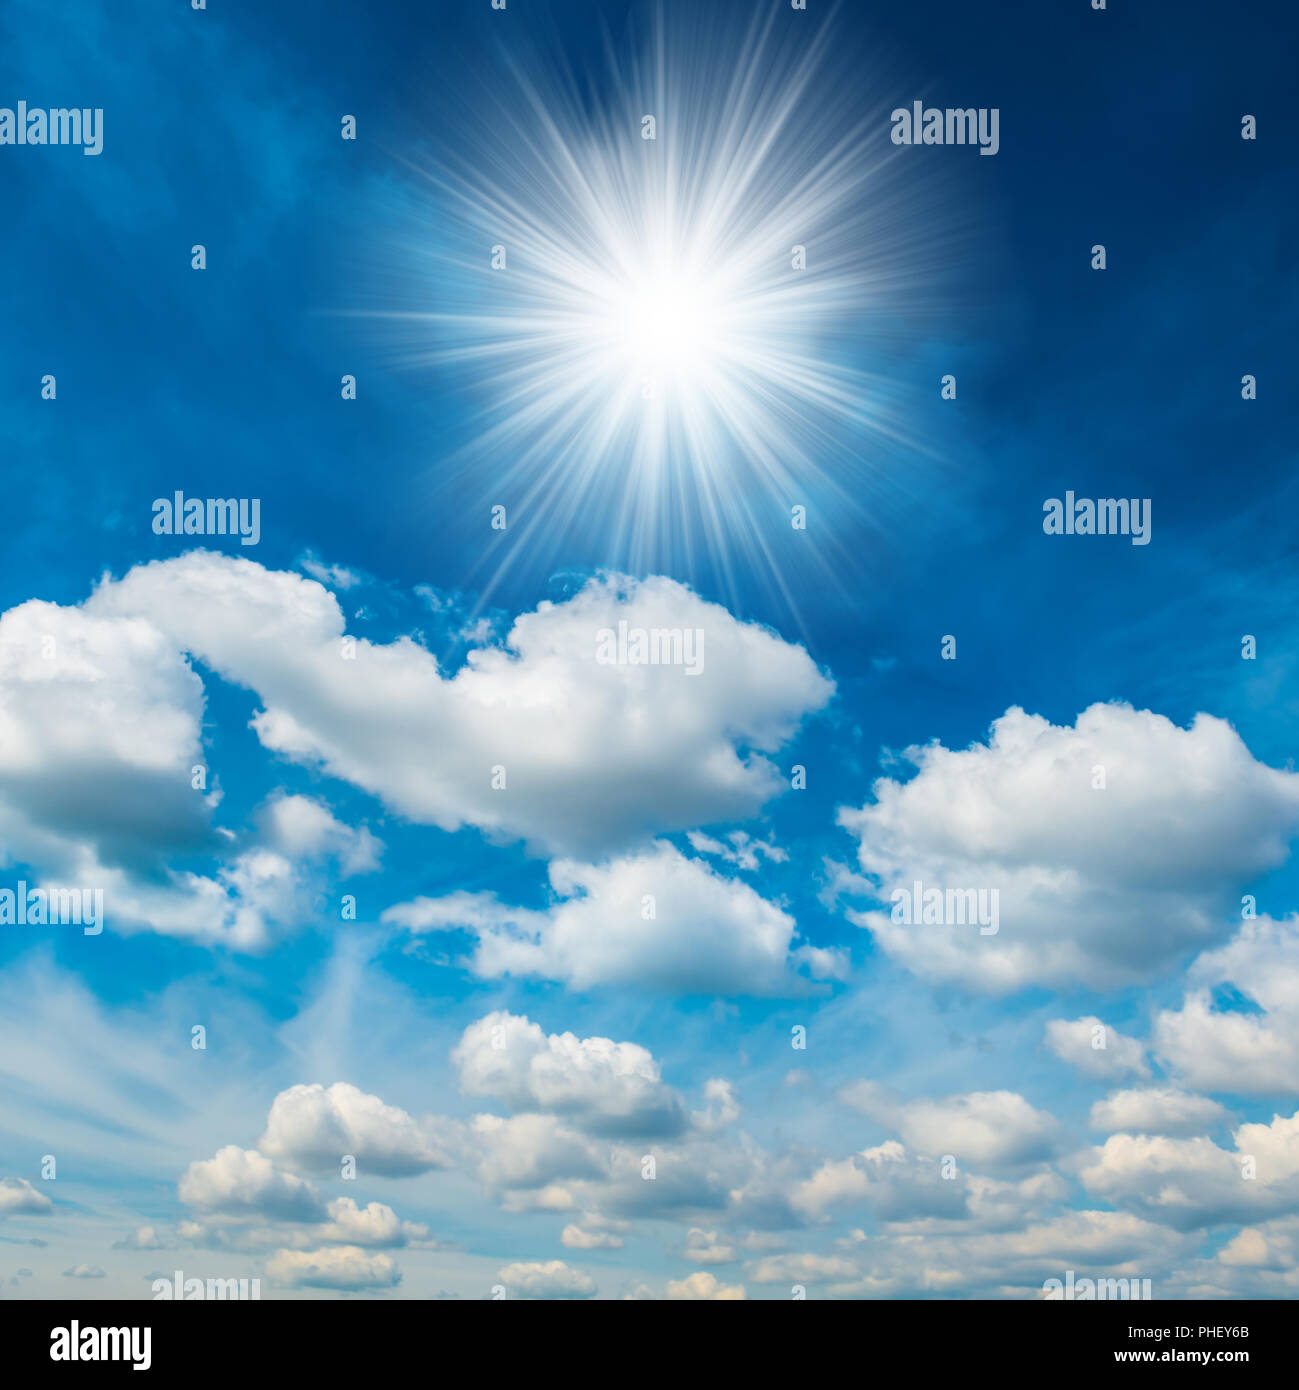 Bright shining sun with white clouds Stock Photo